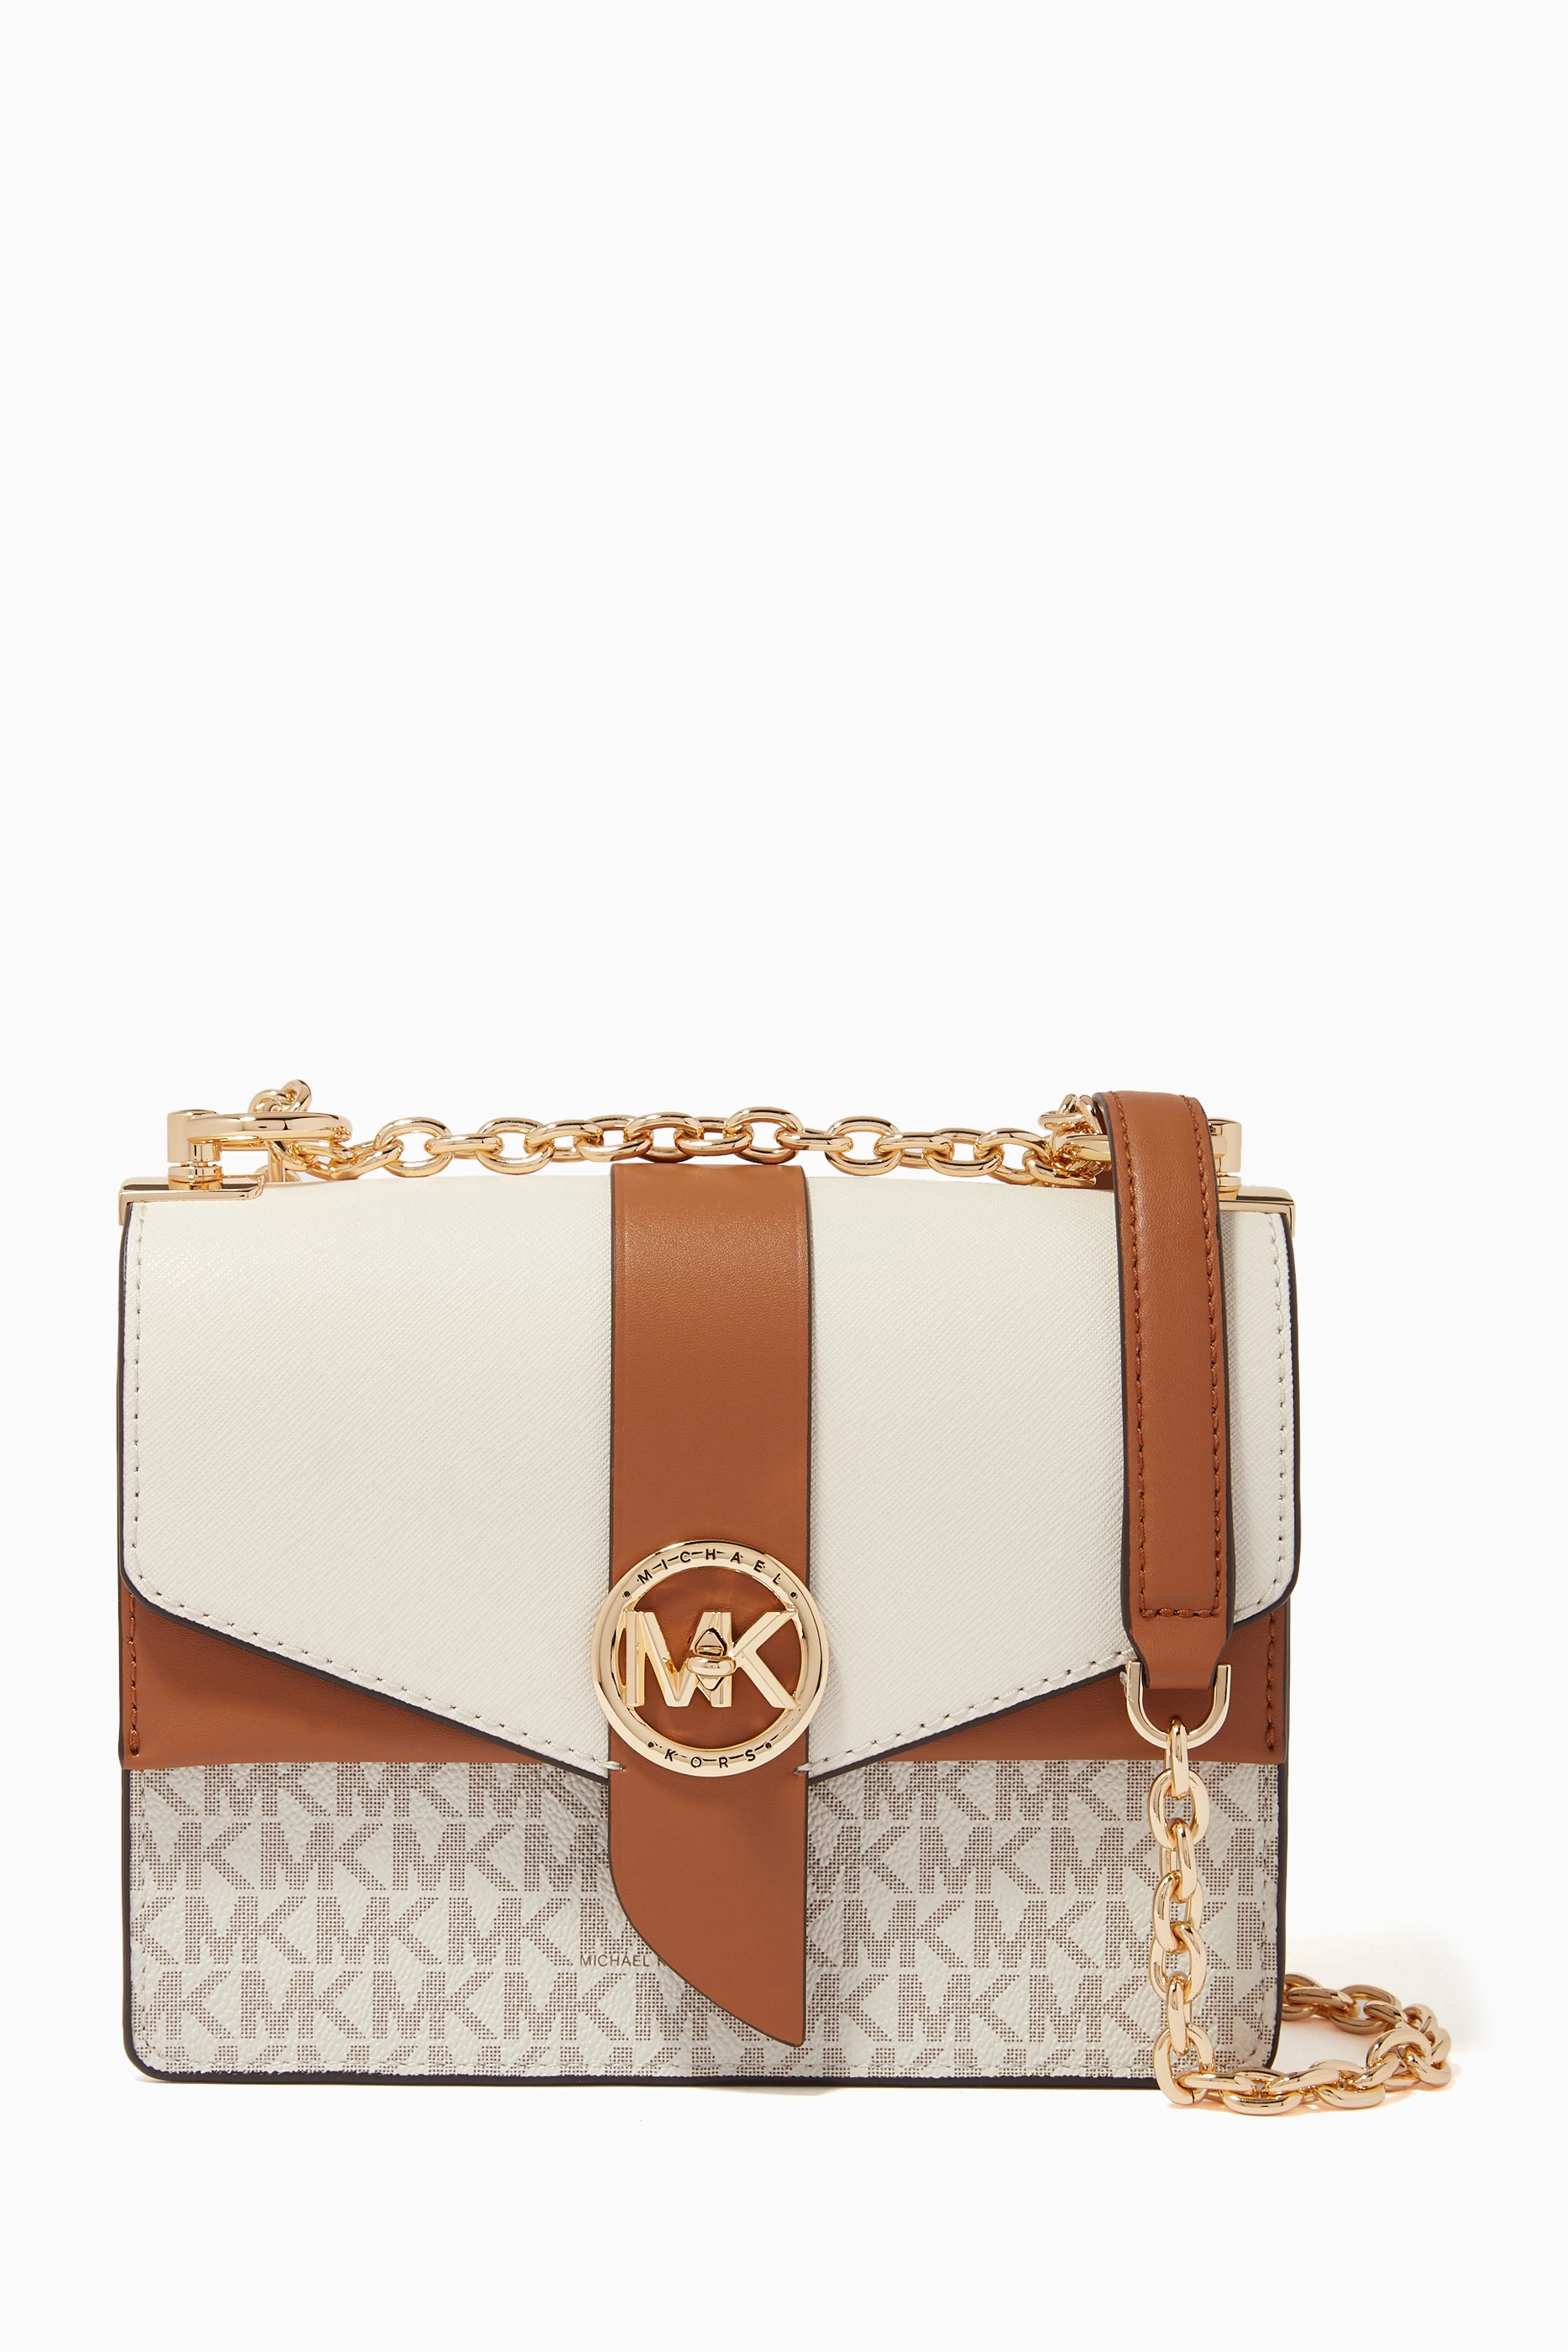 Michael Kors Greenwich Small Color-Block Logo and Saffiano Leather  Crossbody Bag